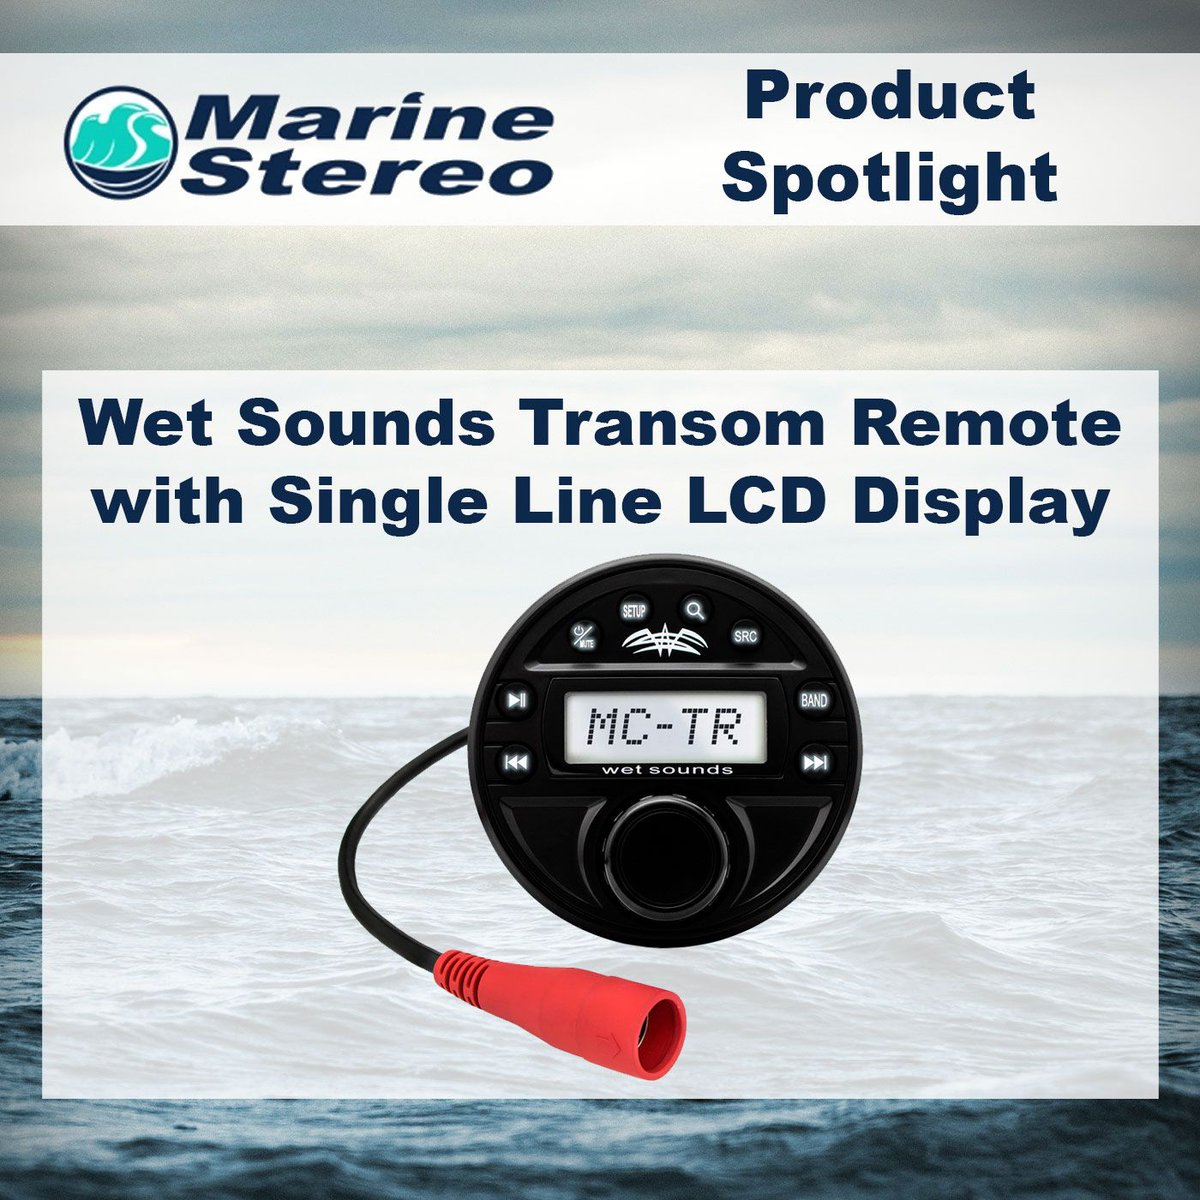 With the holidays fast approaching, here is a great recommendation for those of you who already have a marine #stereosystem in place.

This Transom Remote from Wet Sounds allows you to quickly change songs, adjust volume, or even change audio sources quickly and easily.